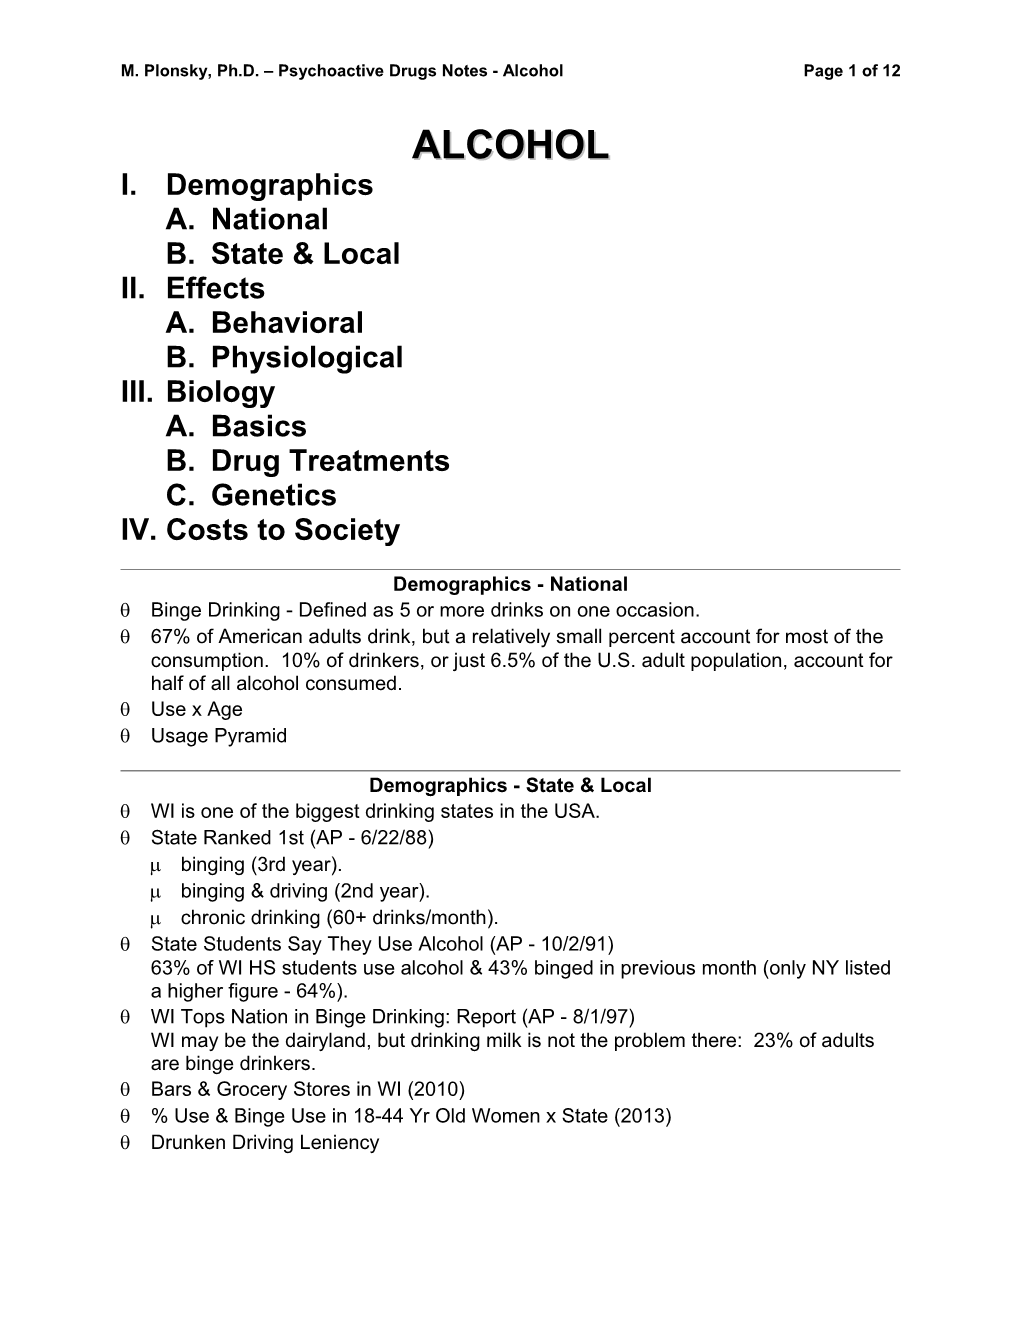 M. Plonsky, Ph.D. Psychoactive Drugs Notes - Alcohol Page 2 of 12